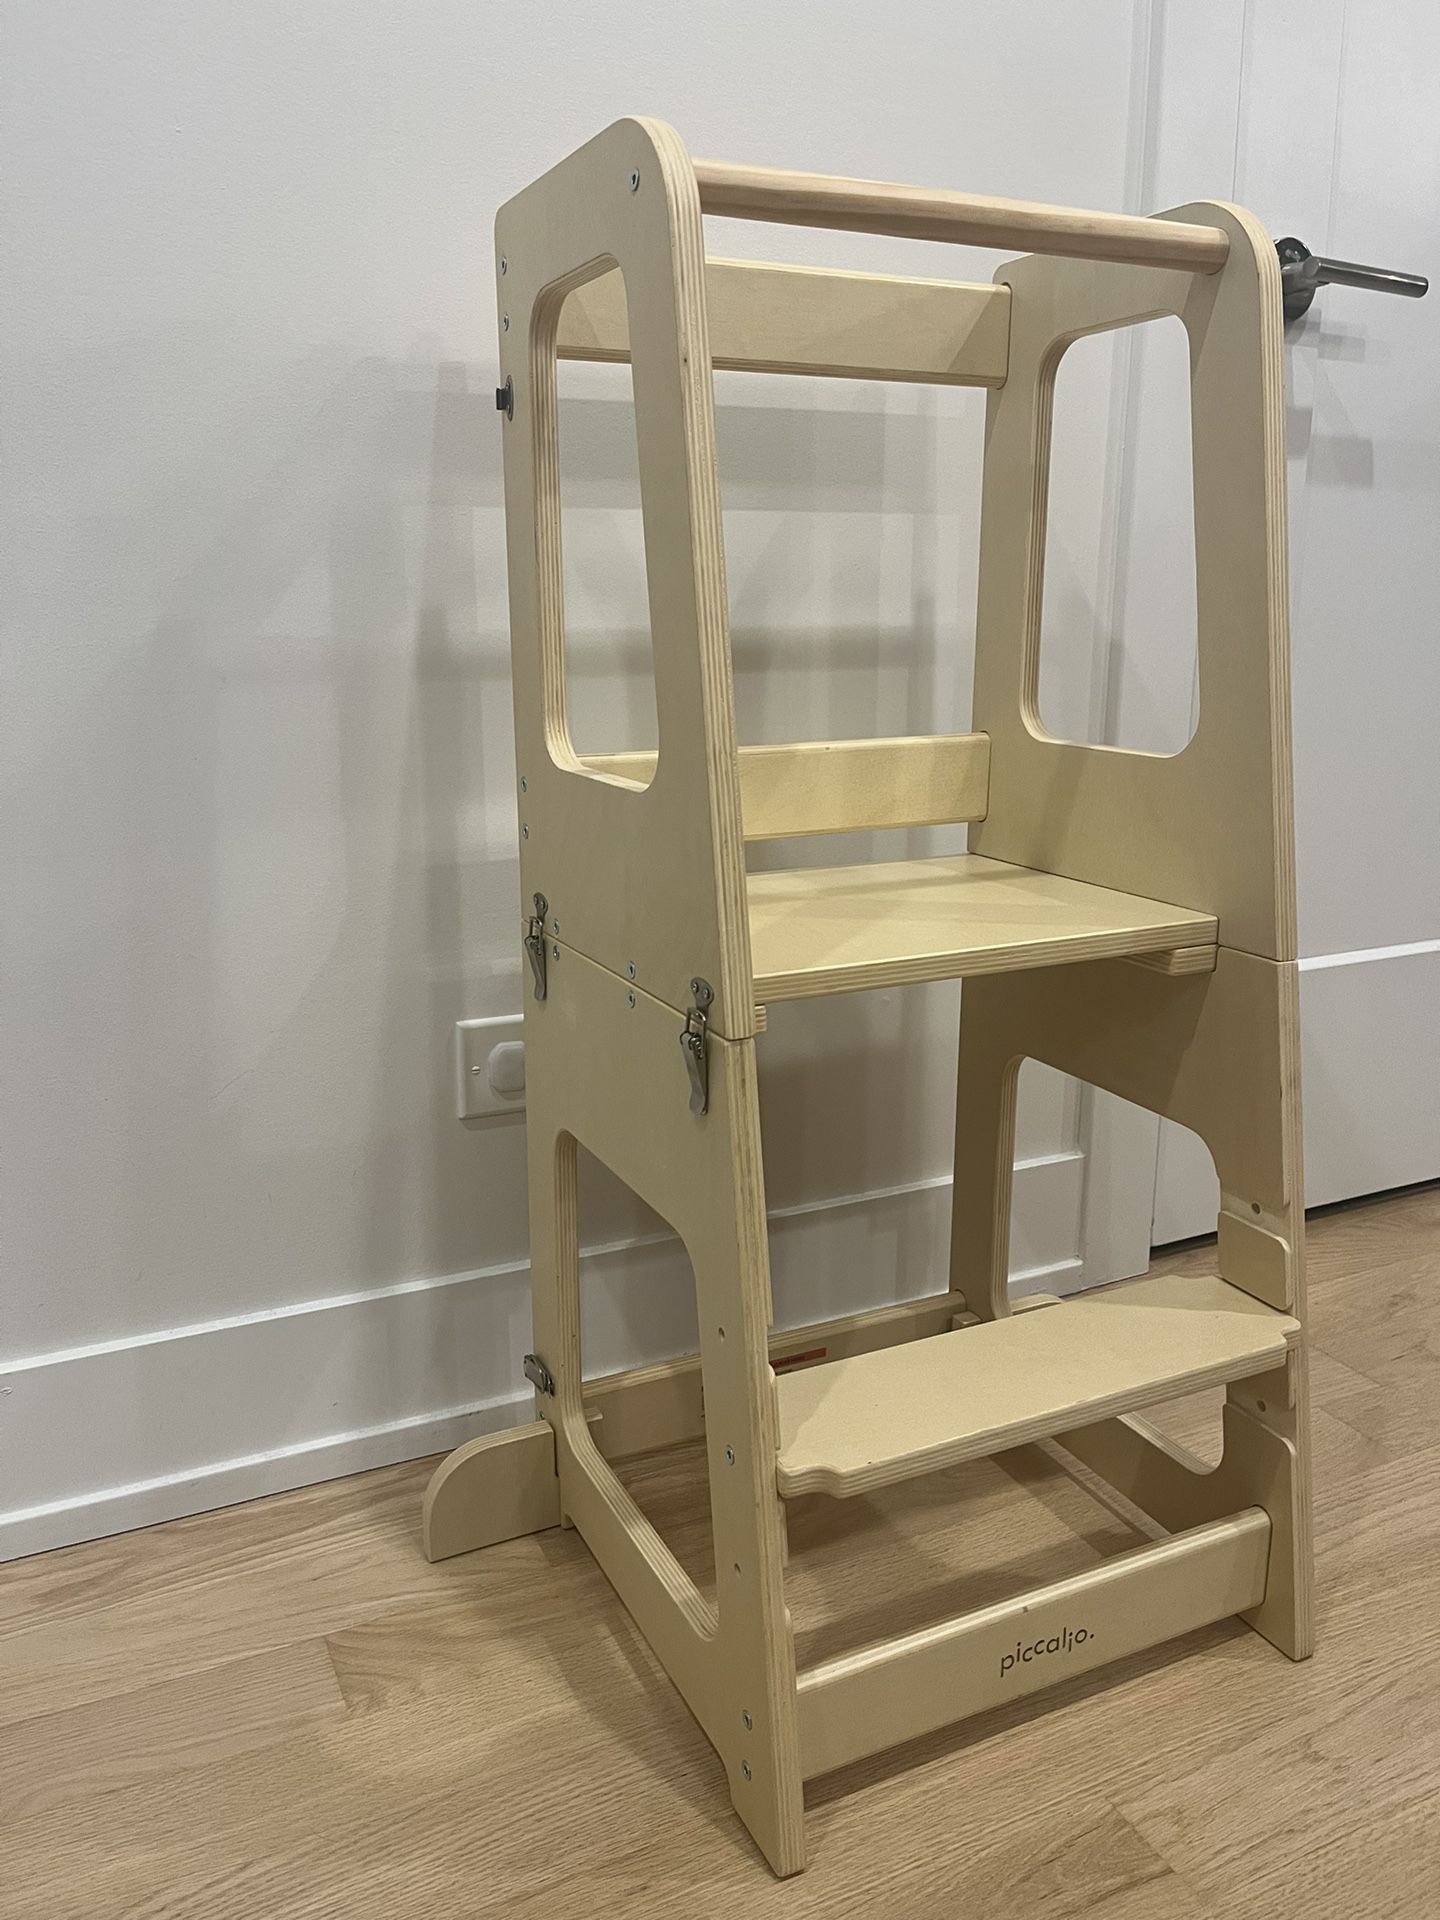 Piccalio Toddler Tower